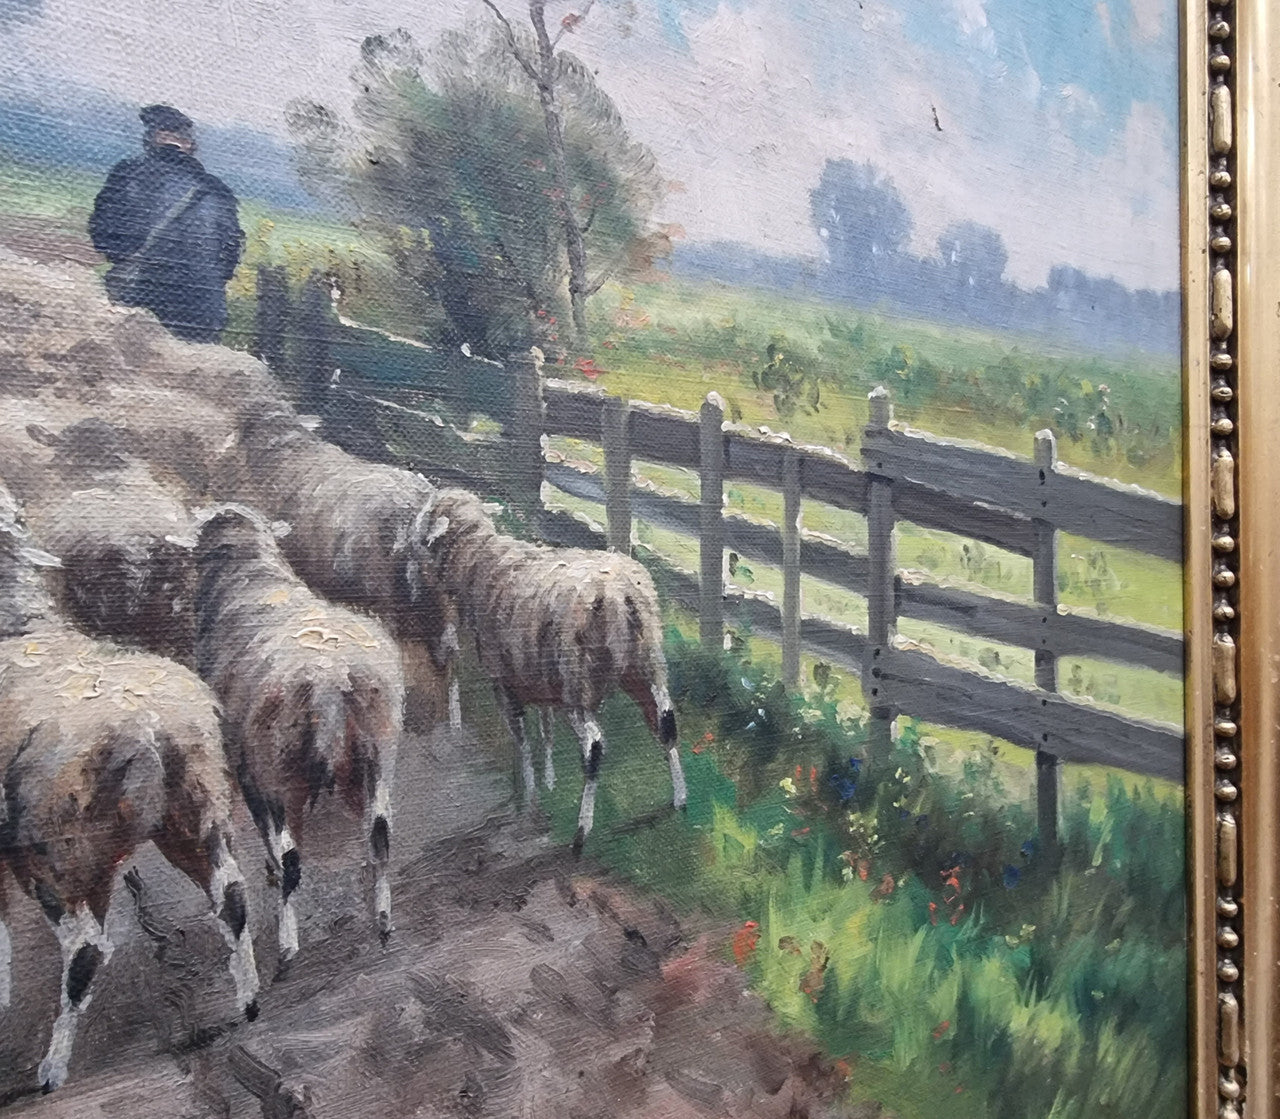 Sourced in France is this beautiful  oil painting on canvas of sheep on  a country farm and framed in a ornate gilt frame. In good original condition.